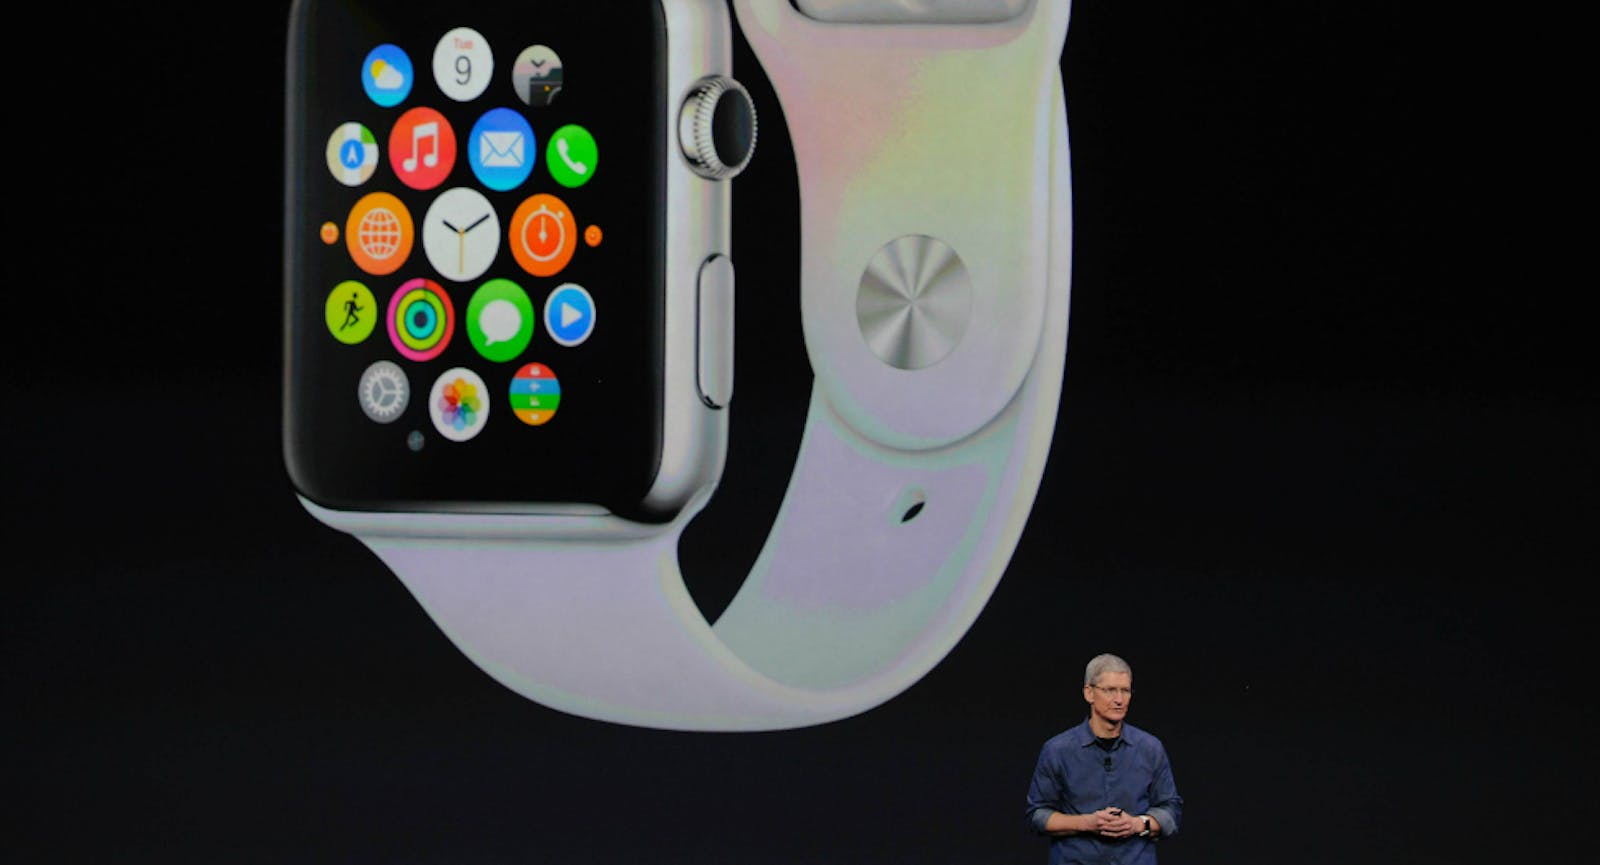 Apple CEO Tim Cook introduces the watch. Photo by Bloomberg.